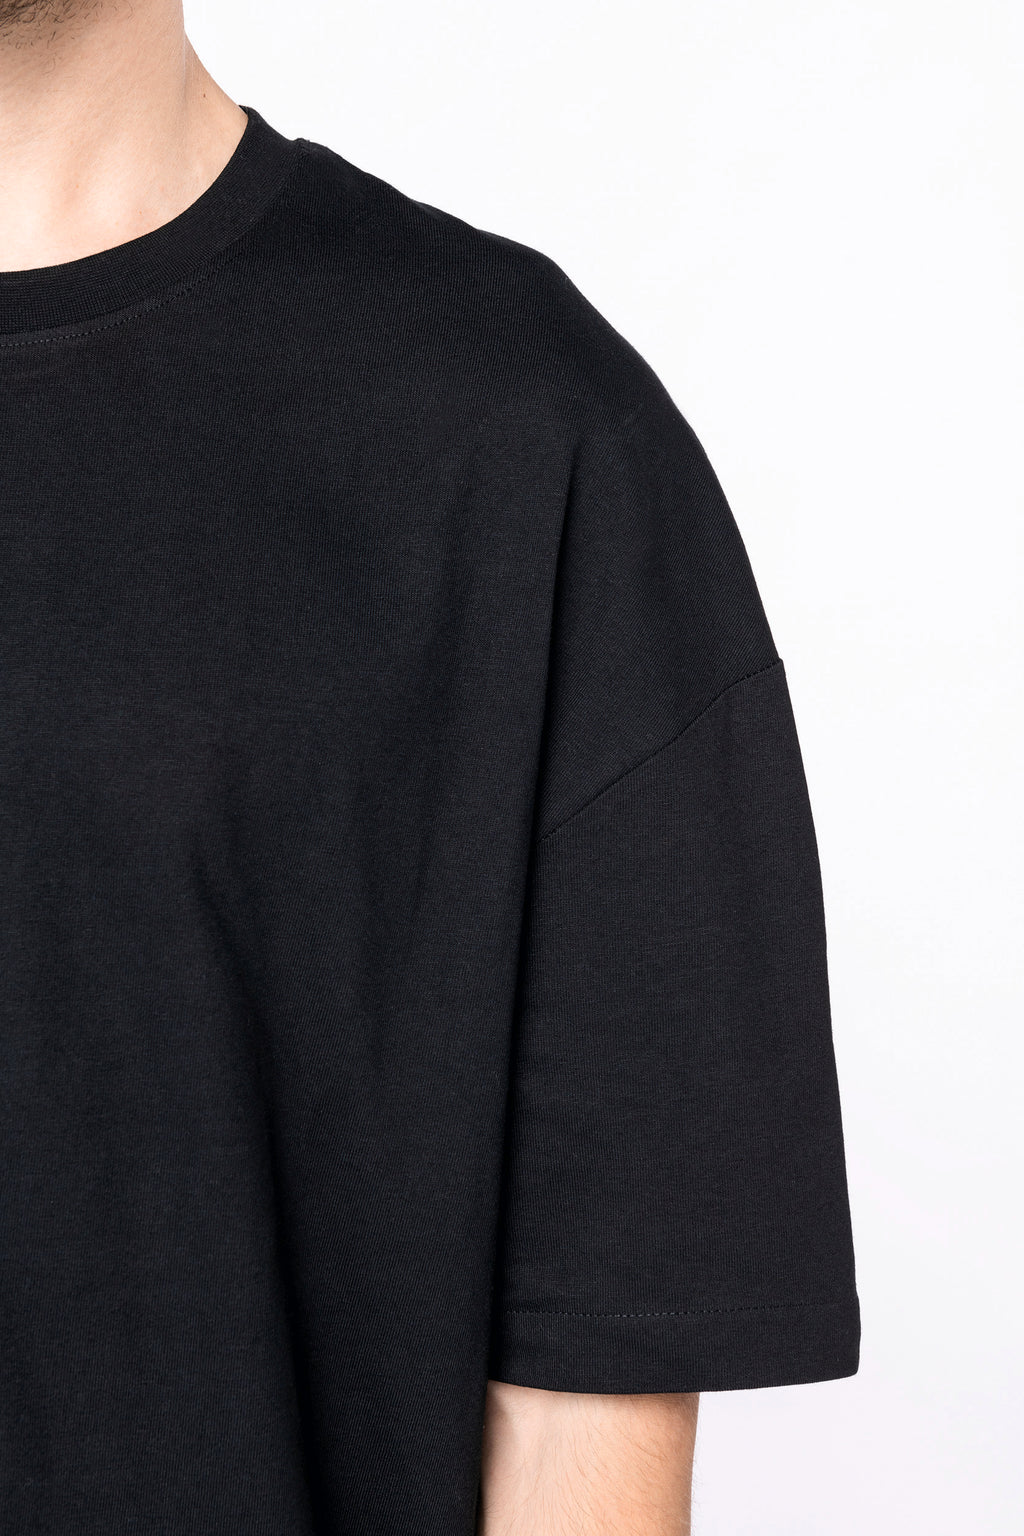 Oversize clothing: High-Quality Blank Oversized T-shirts and Hoodies.